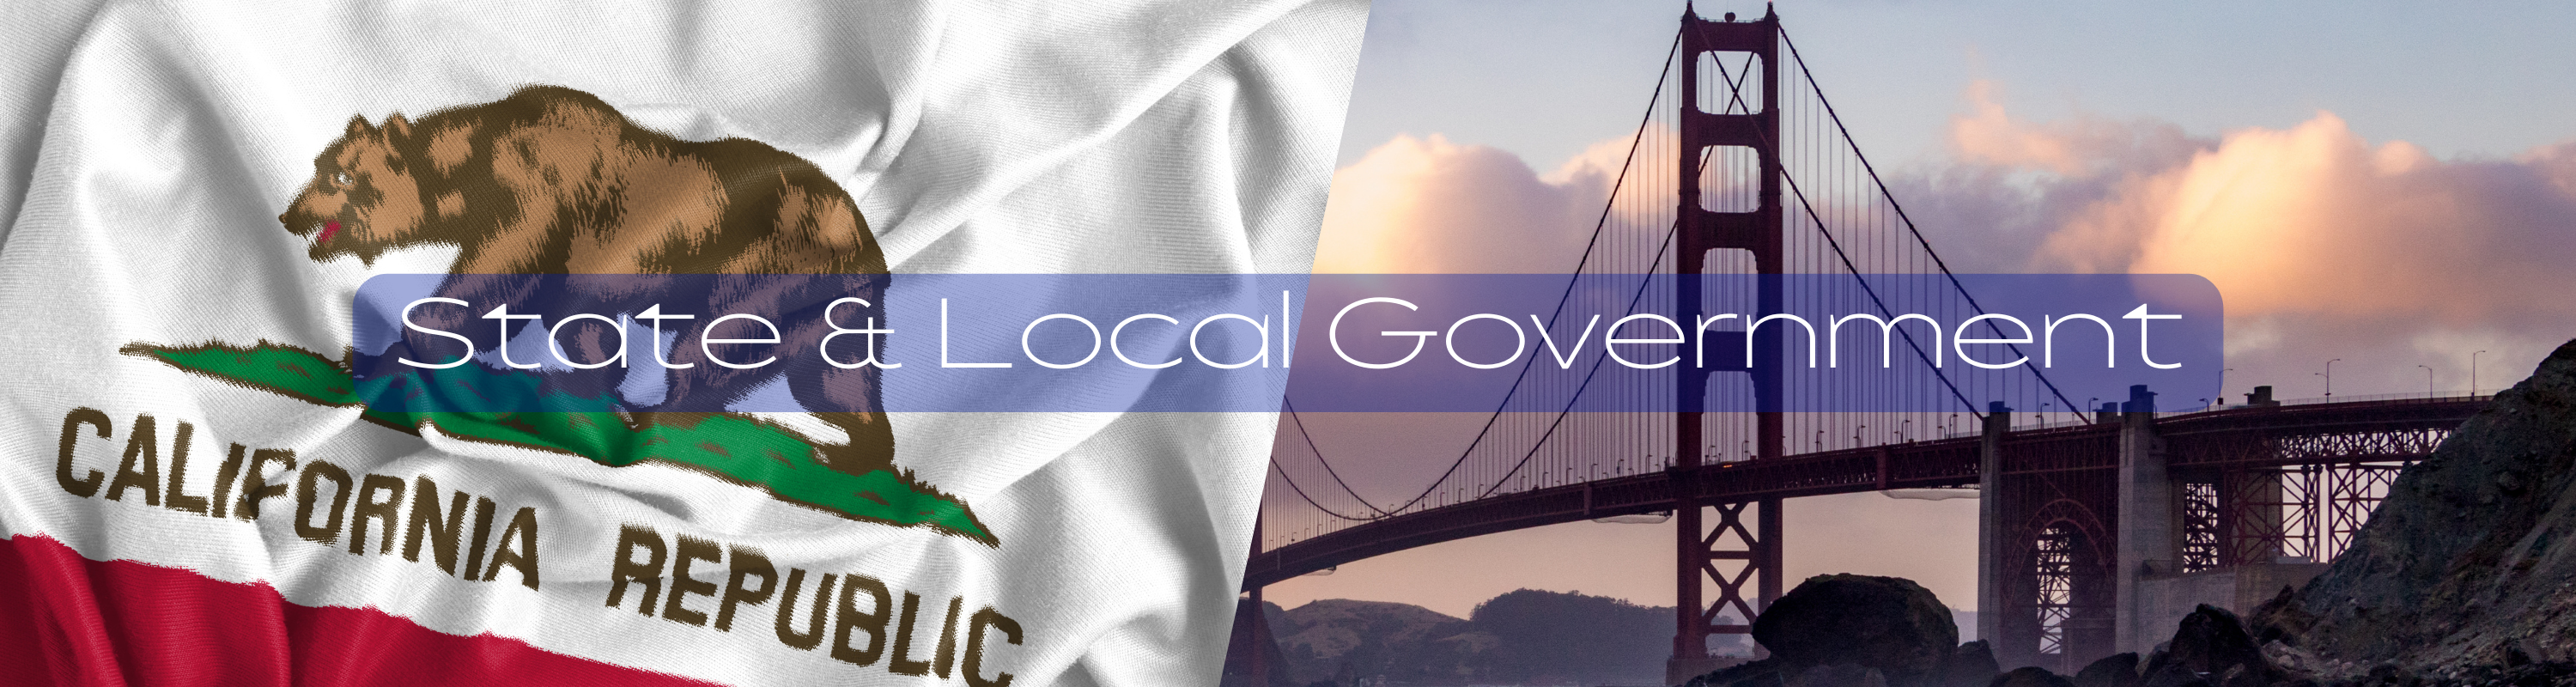 State & Local Government Banner